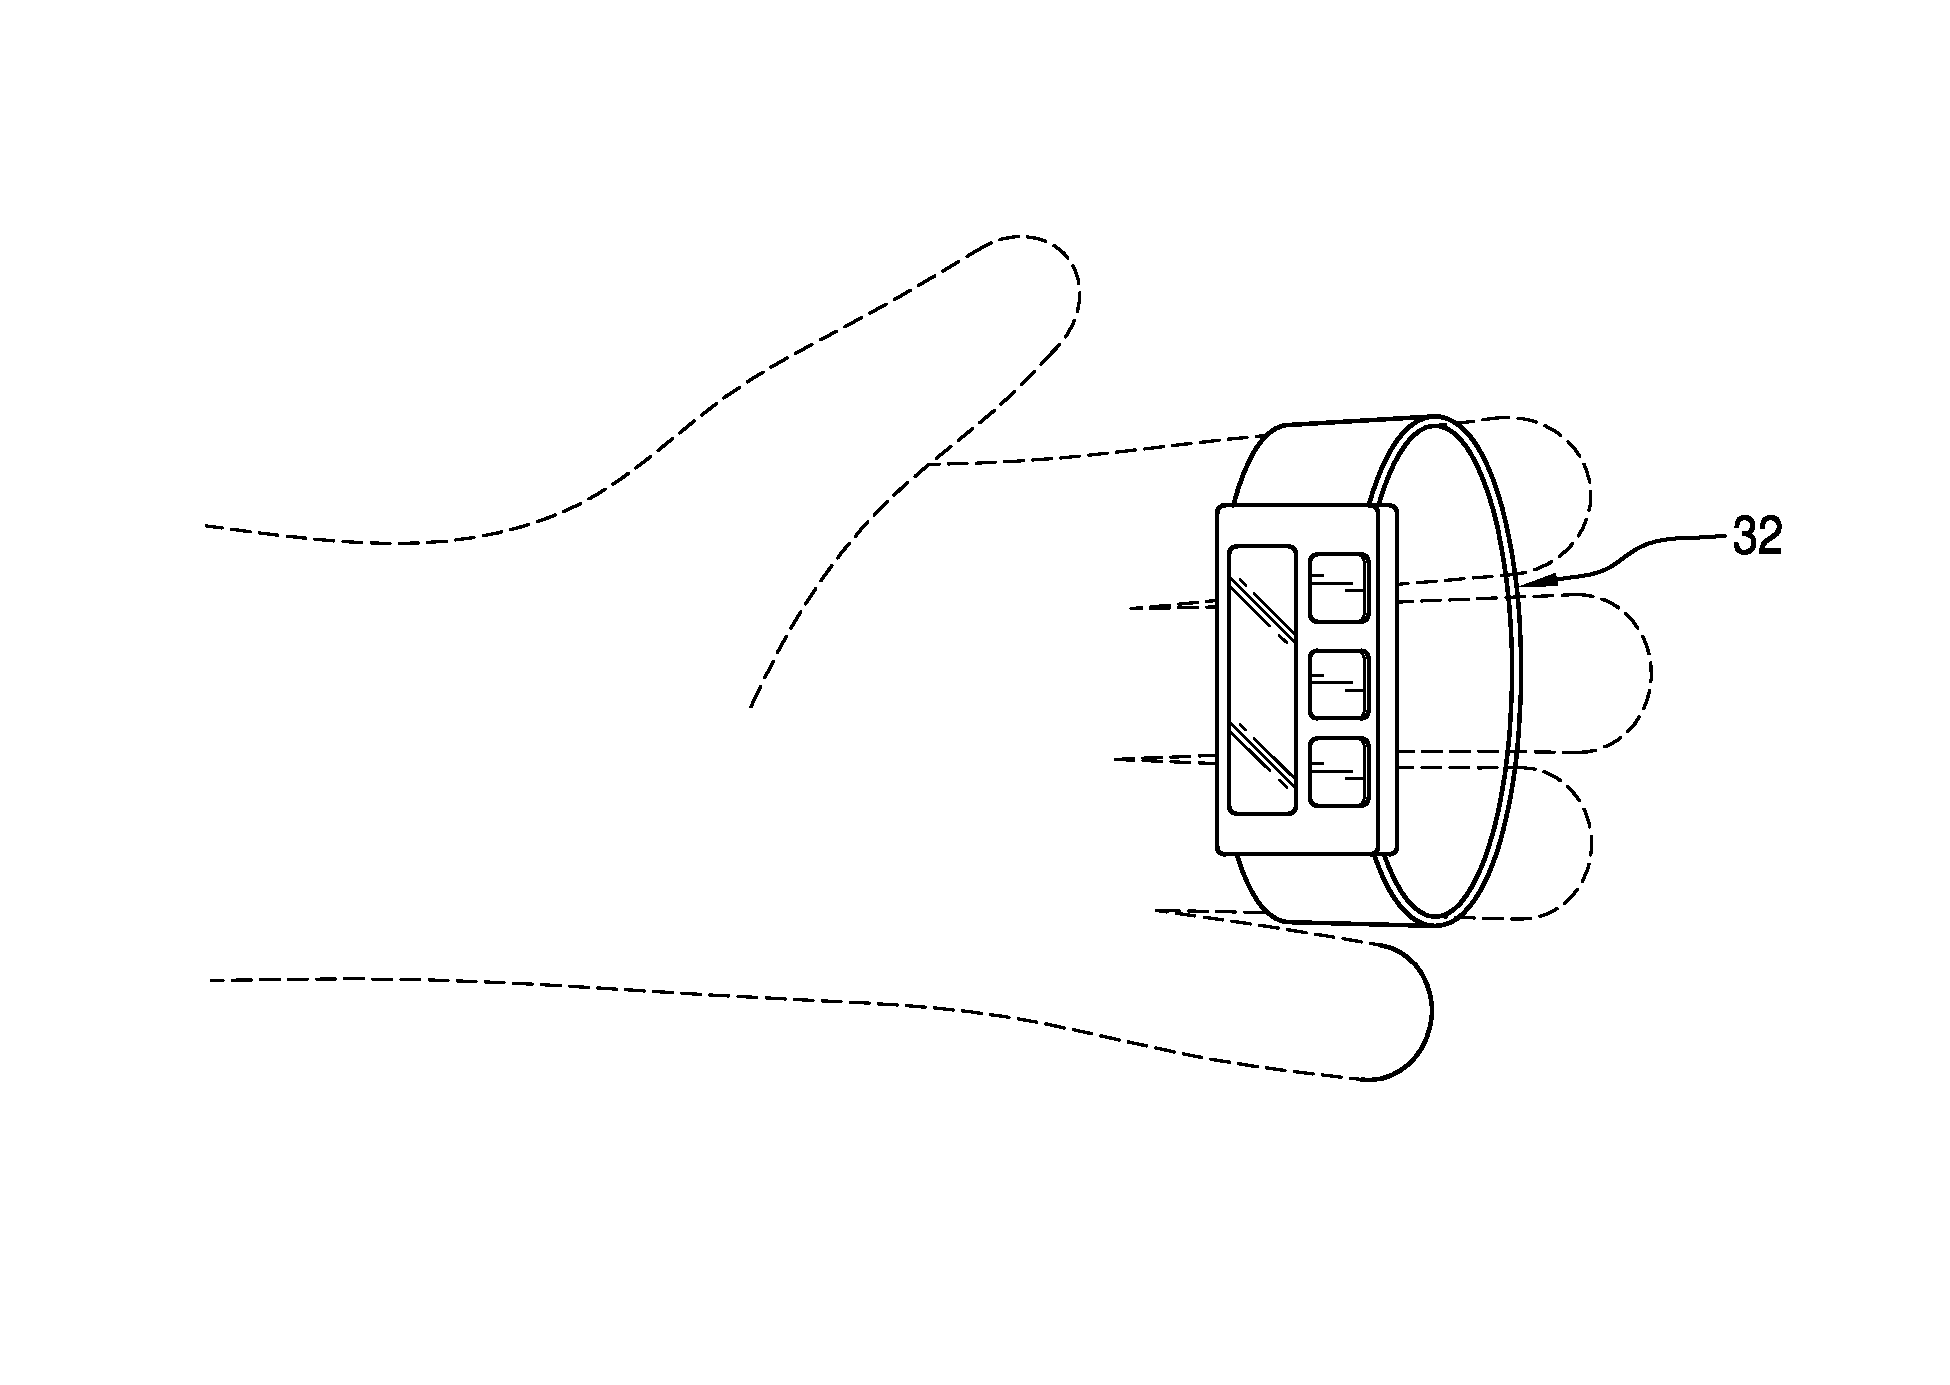 Finger control and data entry device